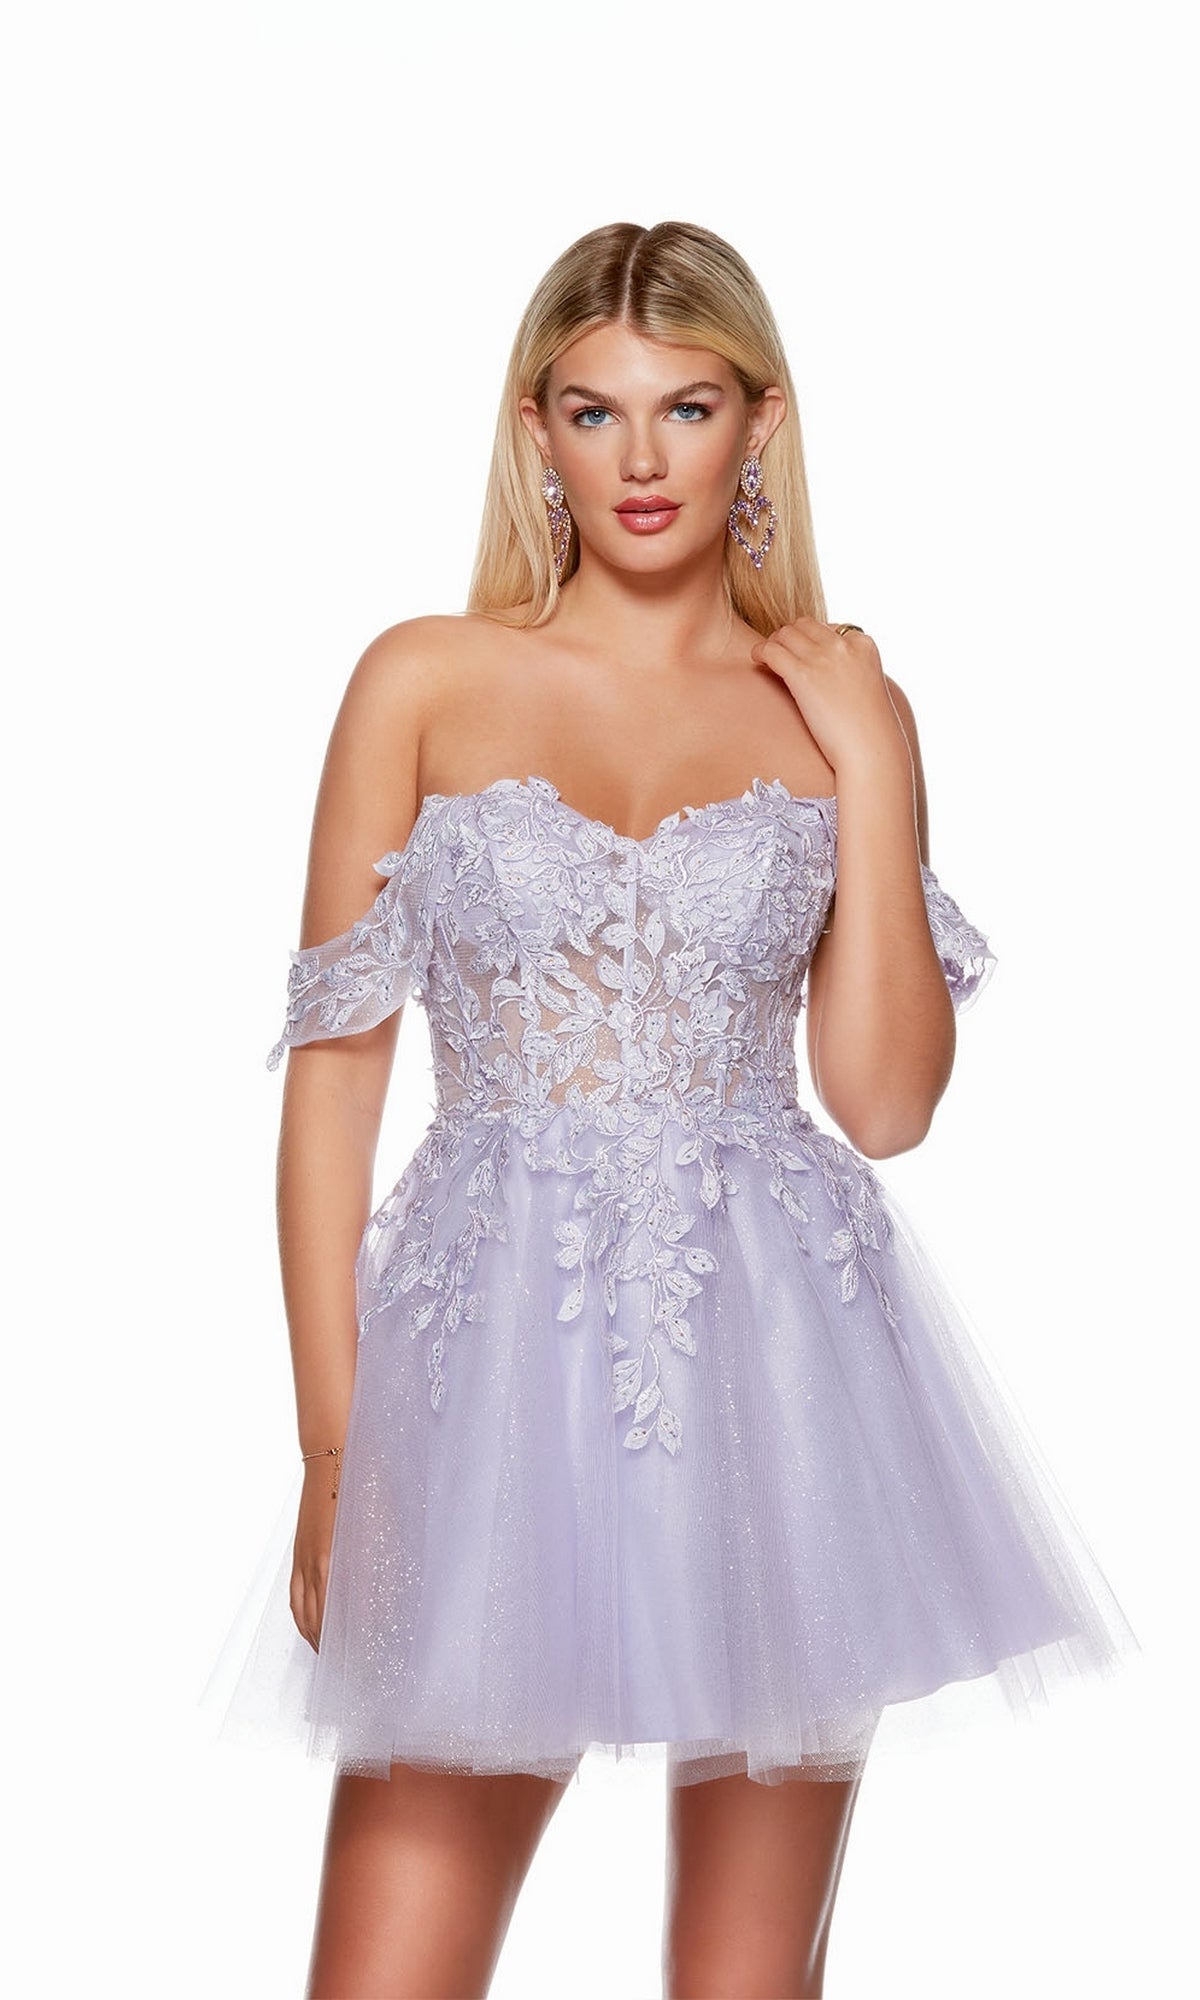 Lilac Short Dress By Alyce For Homecoming 3159